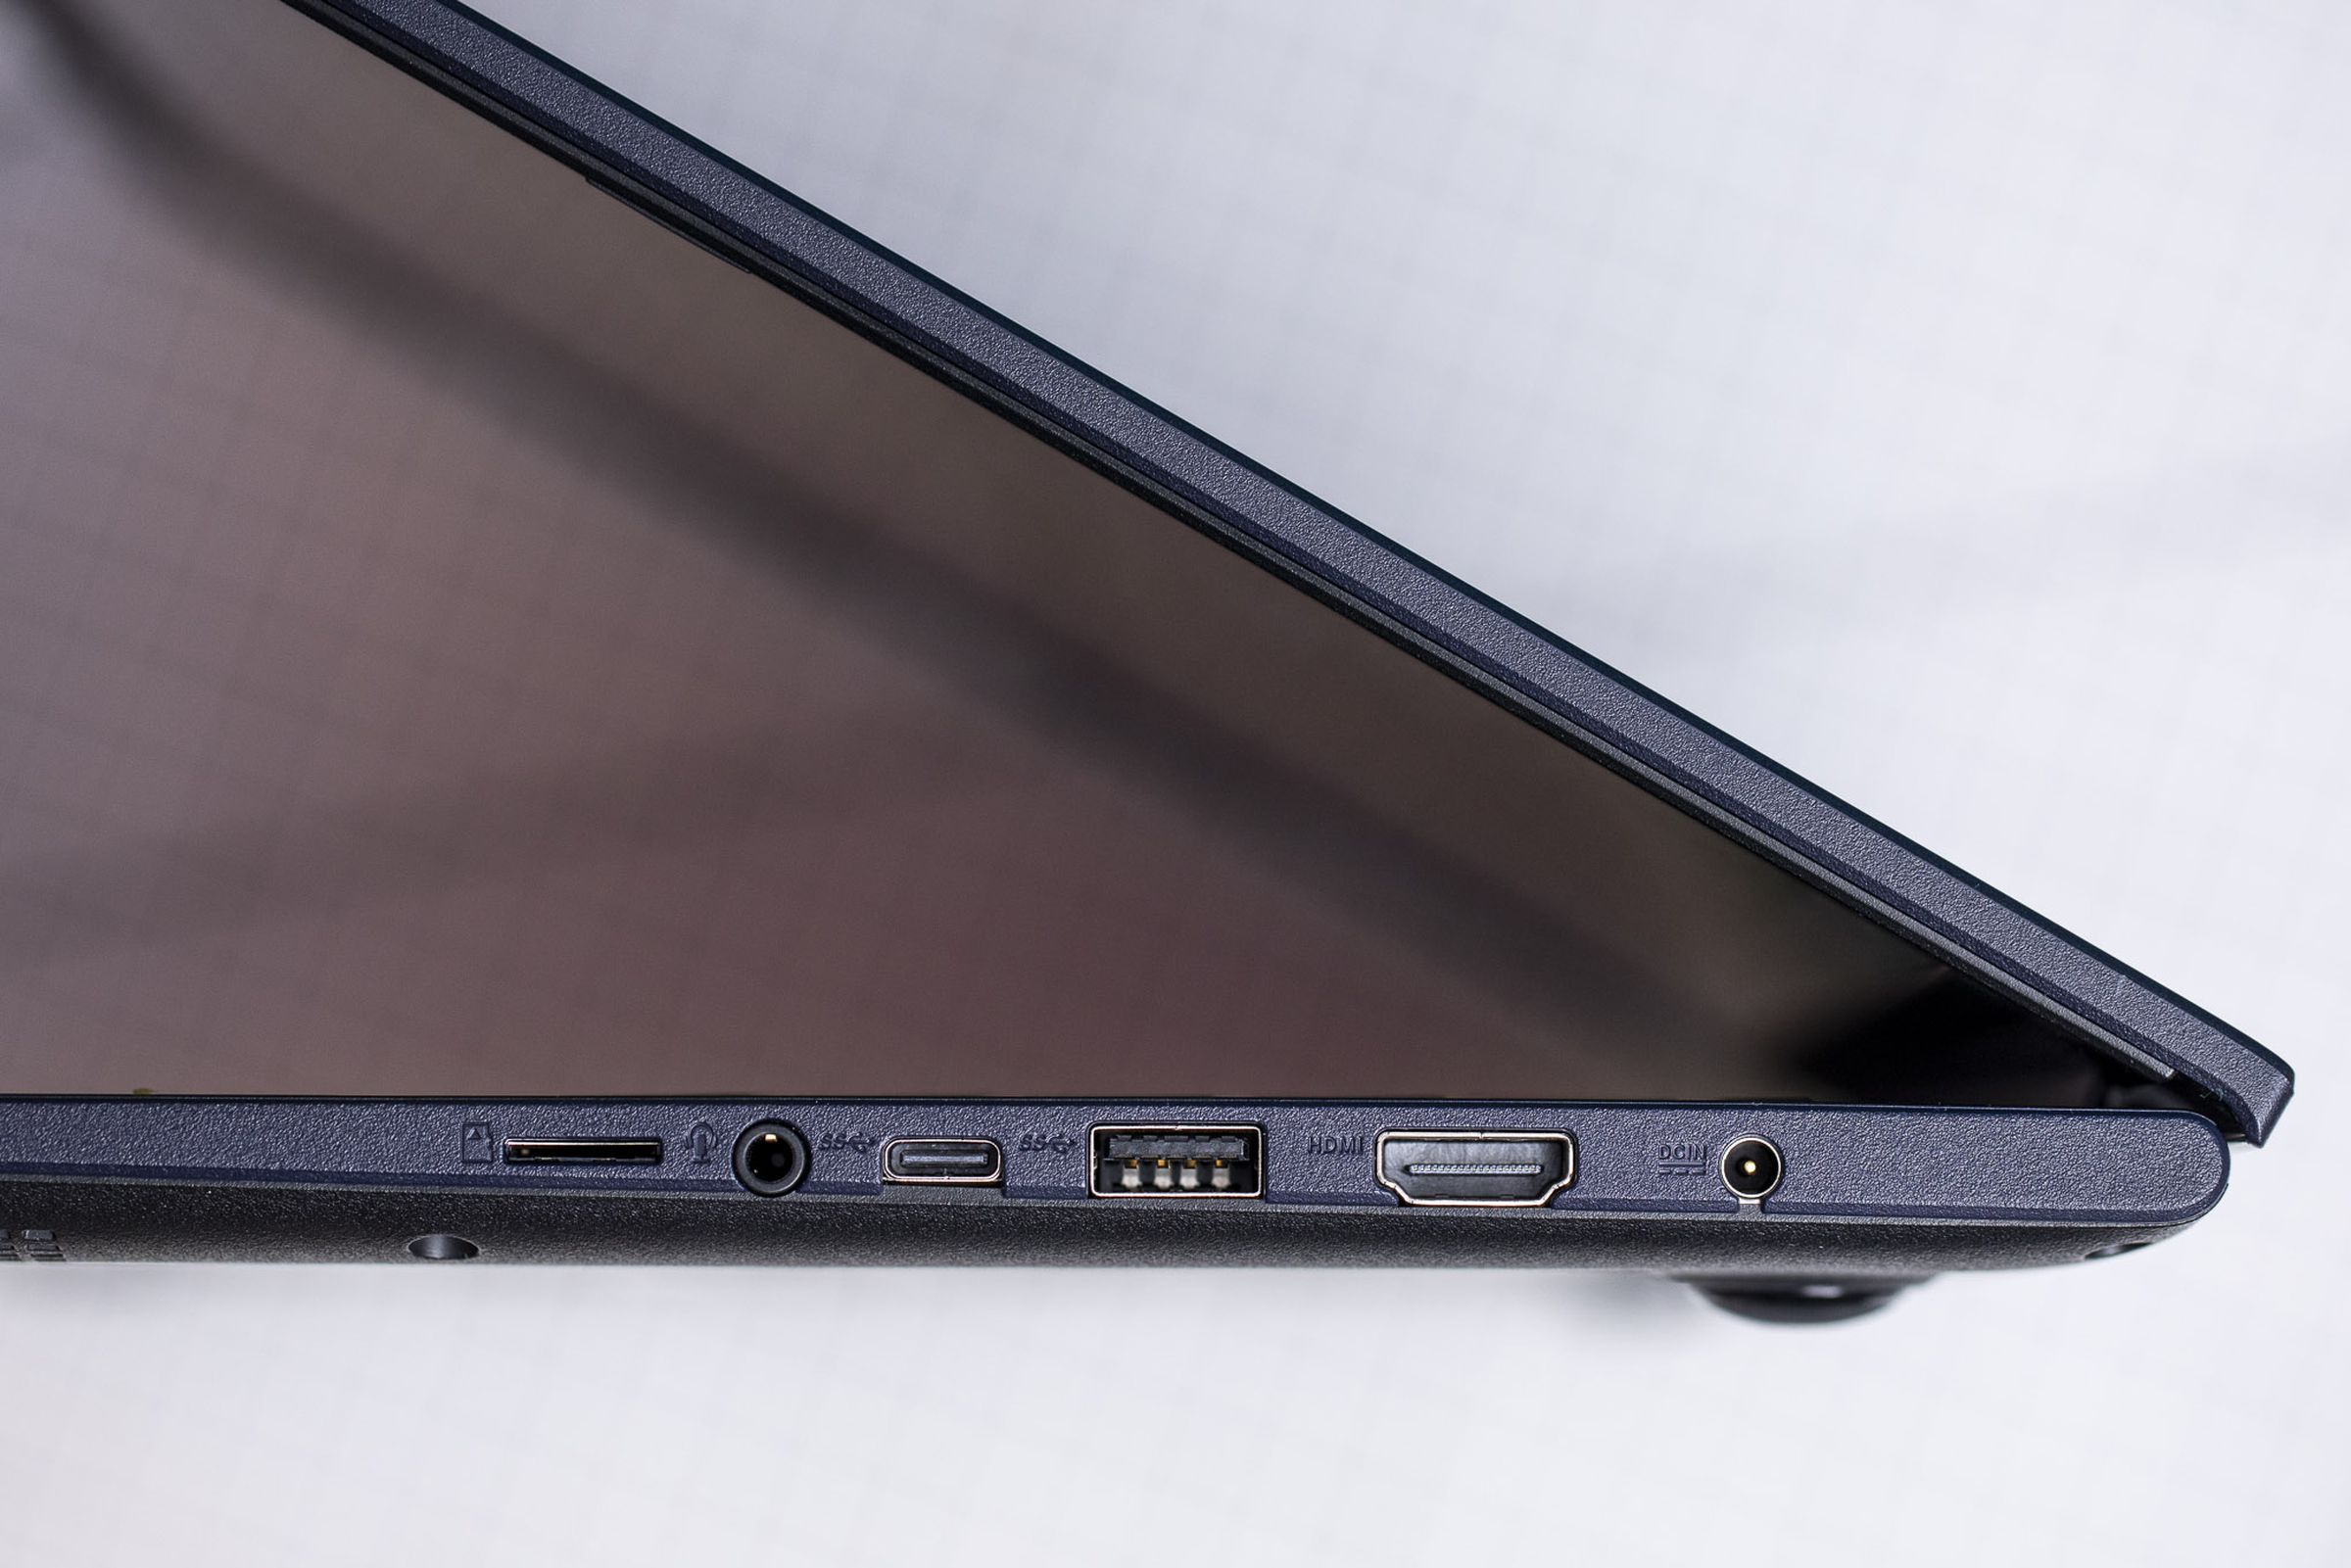 Ports on the right side of the Asus Vivobook 15.